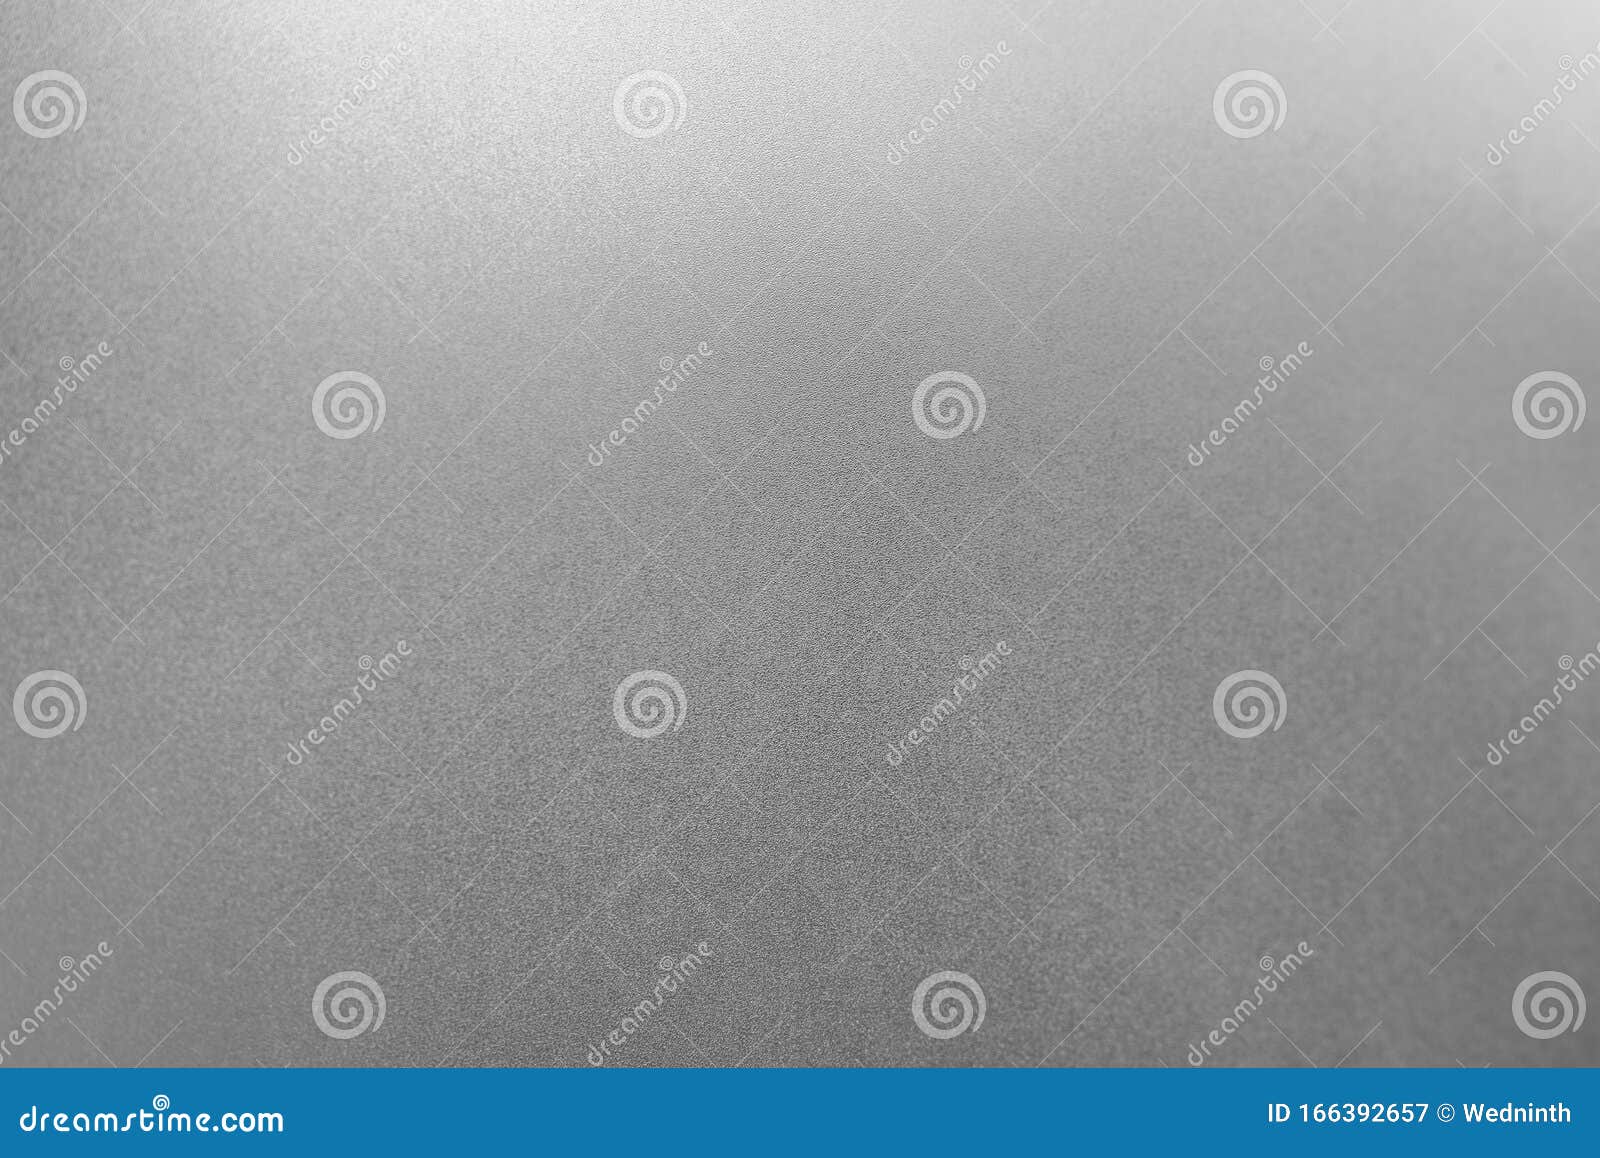 Frosted Glass Texture Background and Abstract Photo Stock Image - Image ...